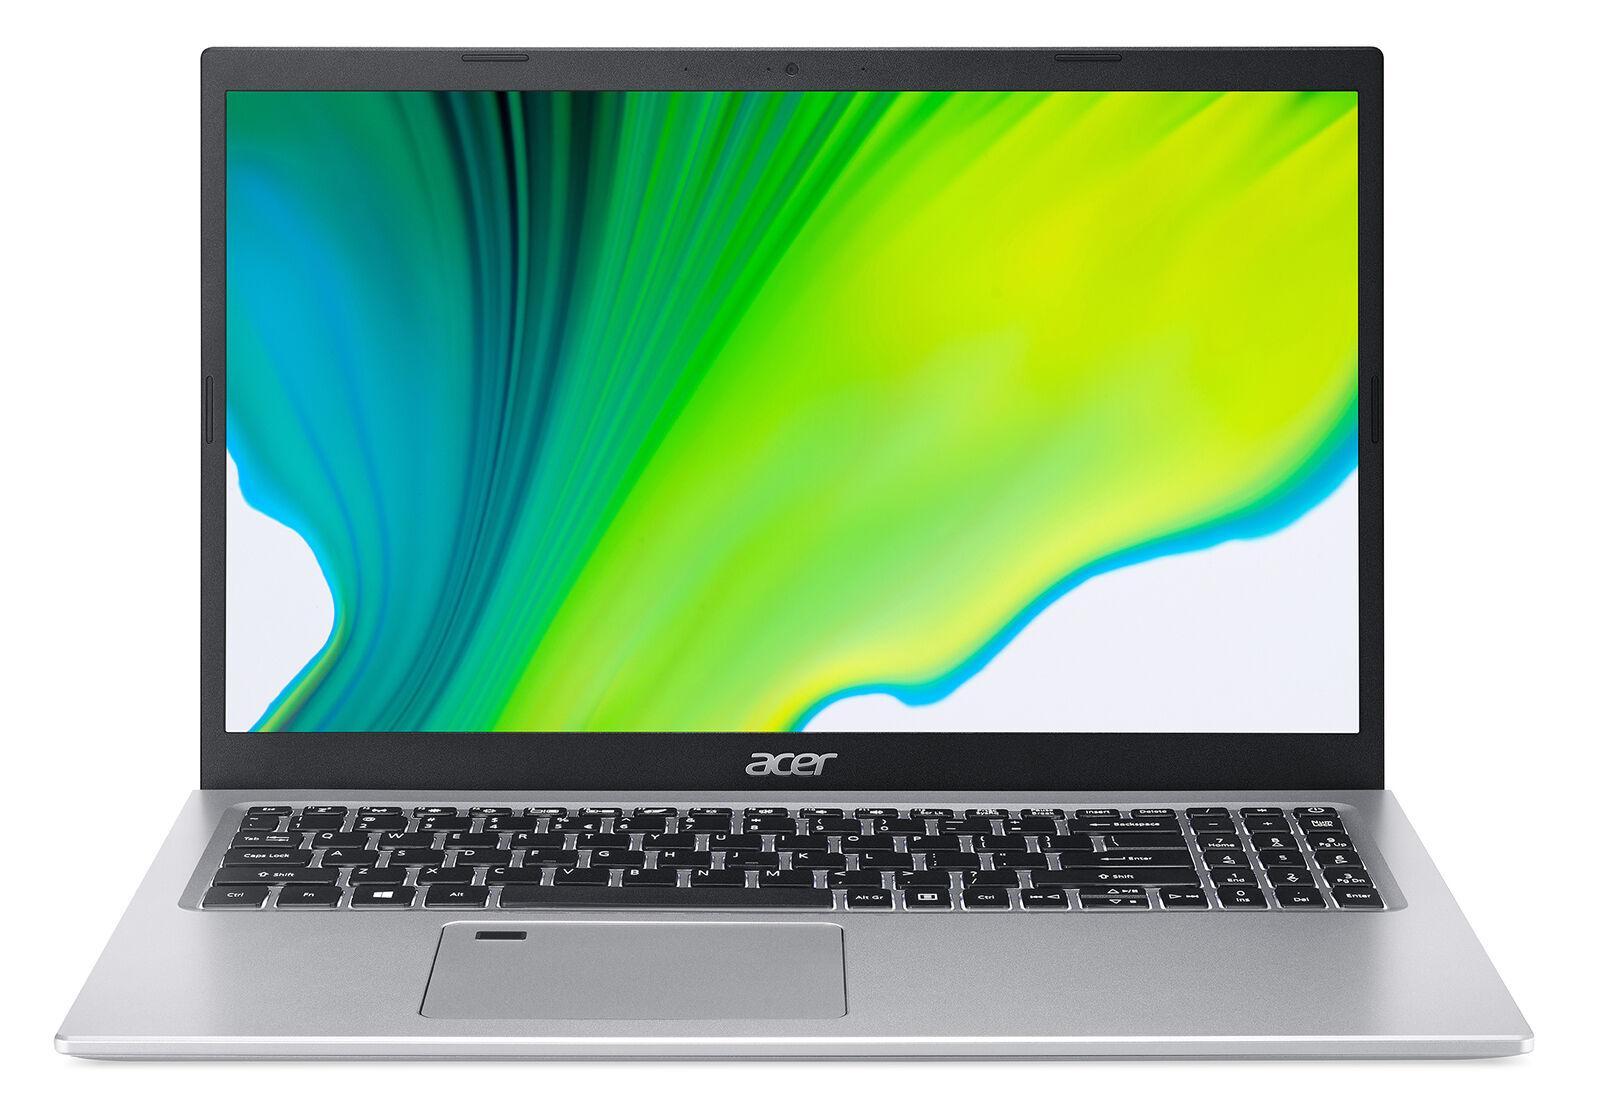 Acer Aspire 5 15in Ryzen 3 4GB 128GB Notebook Laptop for $219.99 Shipped